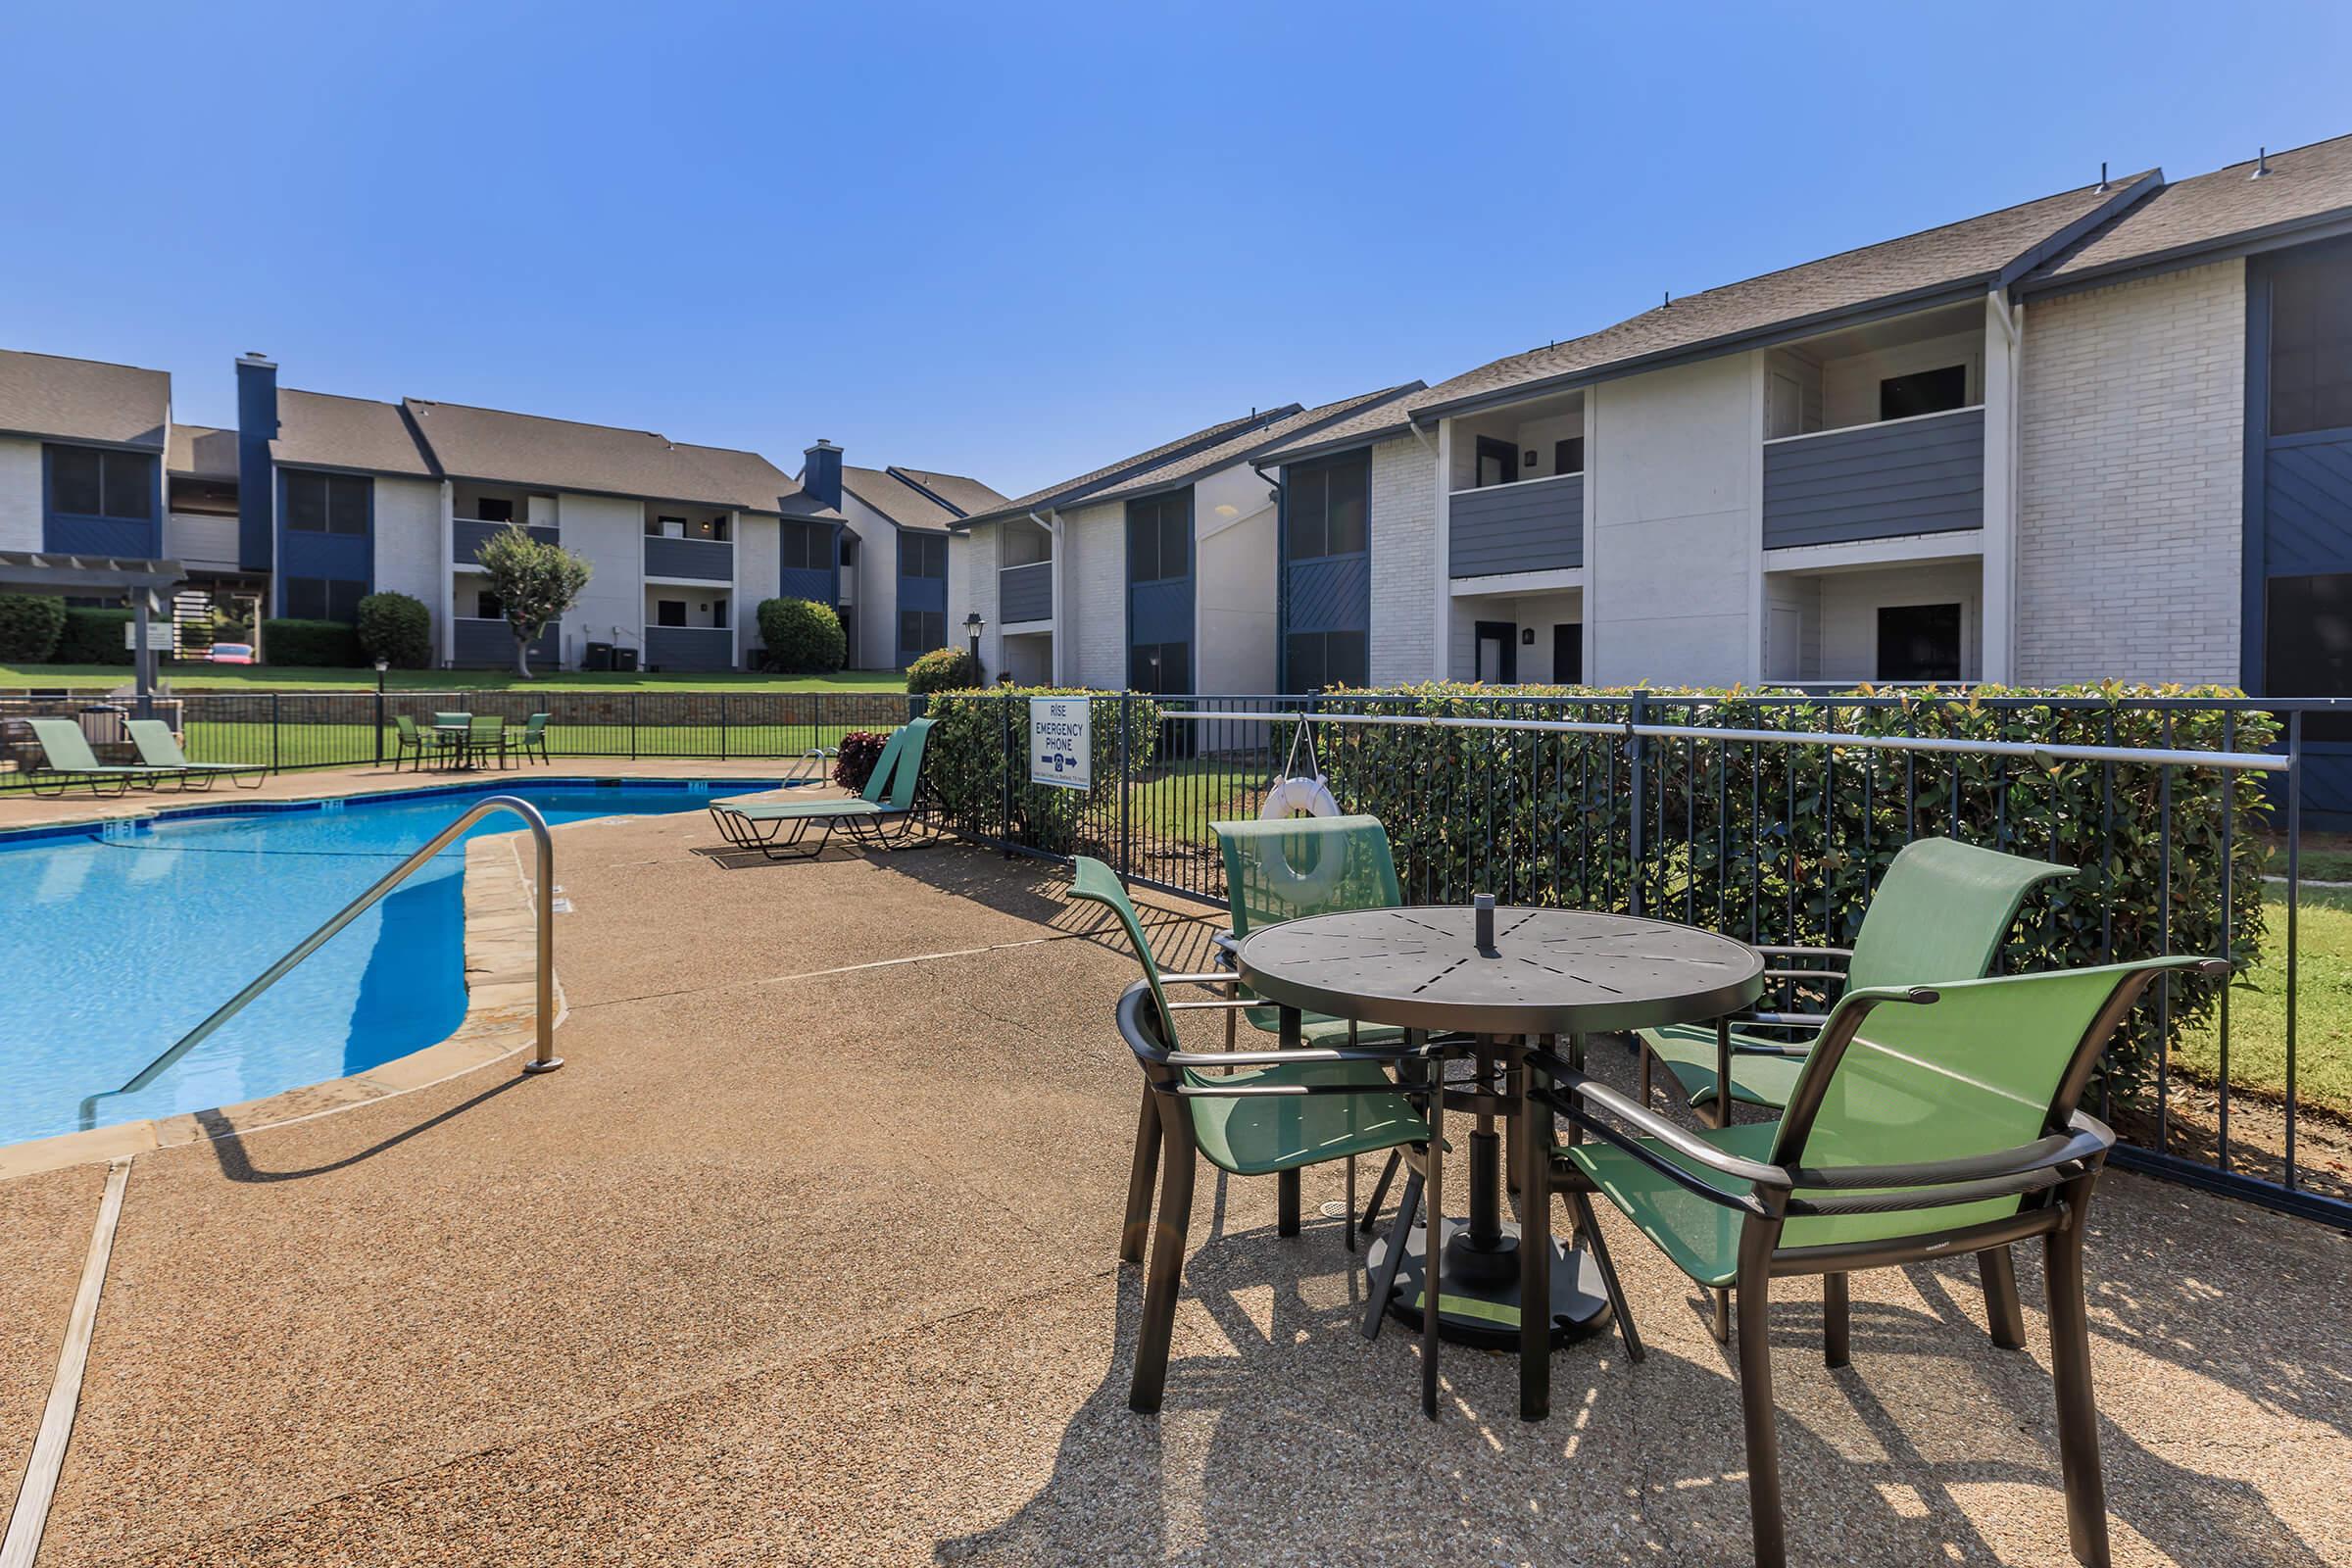 A pool, loungers and table with seating within the Rise Oak Creek apartment community.